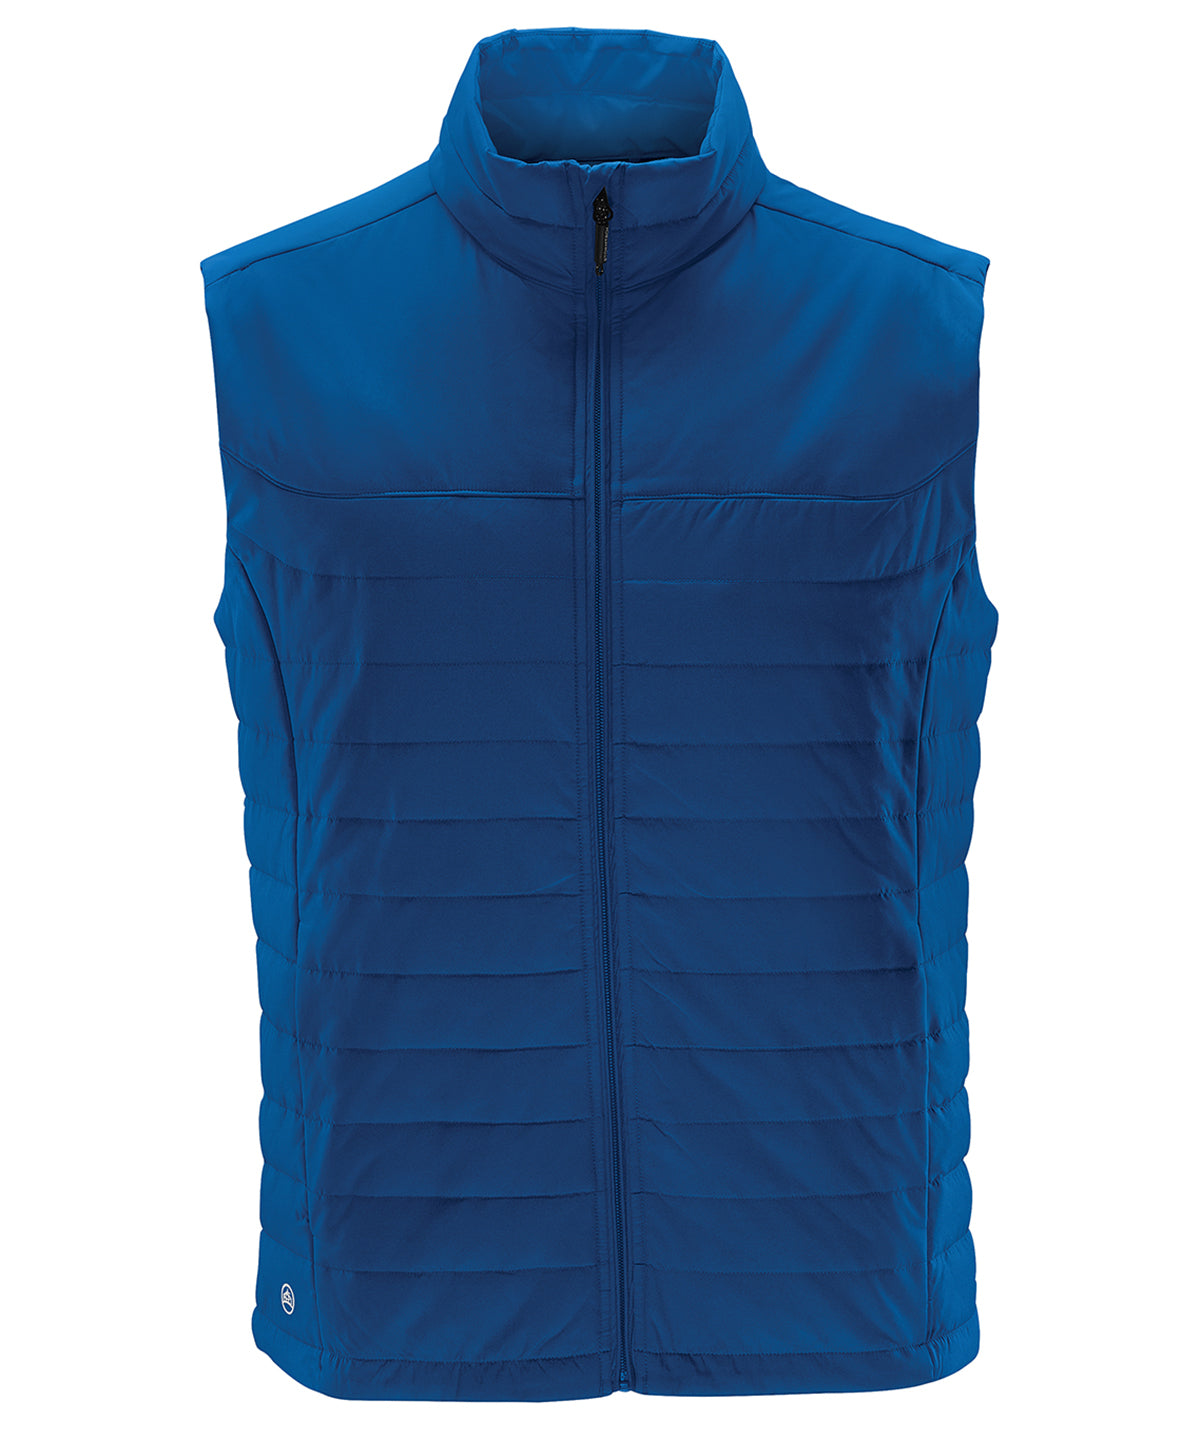 Nautilus Quilted Bodywarmer